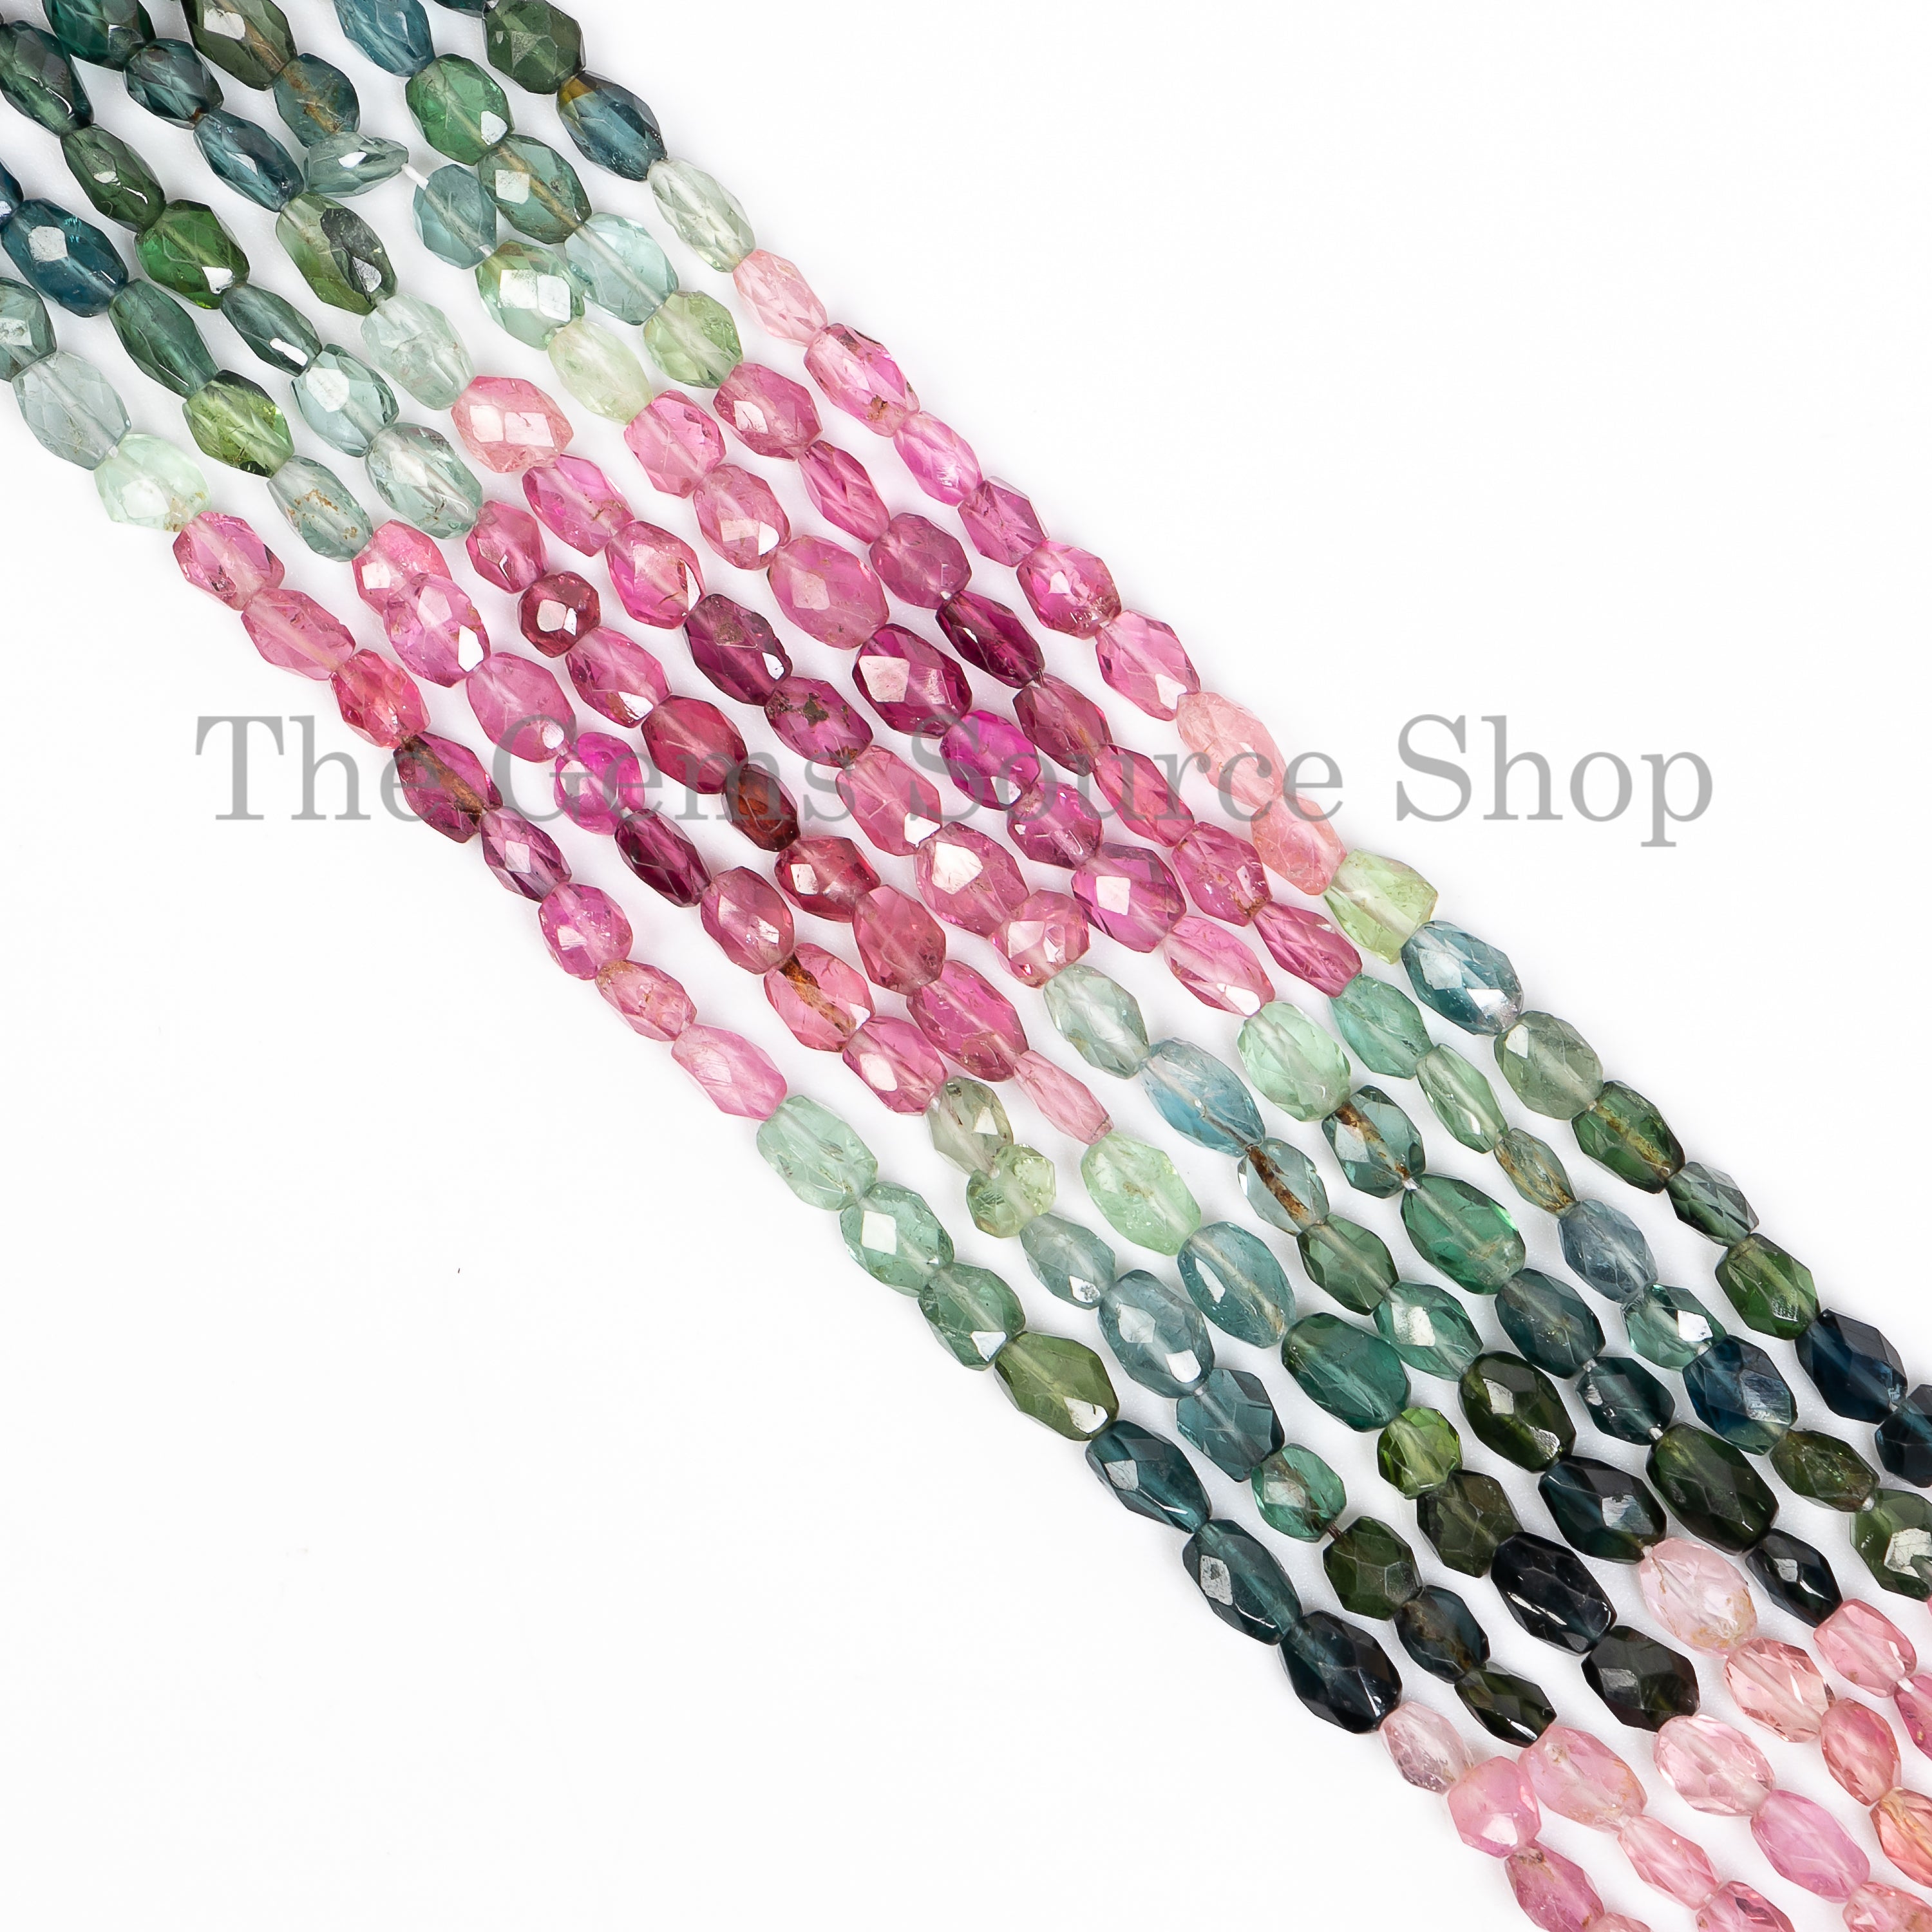 3.5x4-4x6 mm multi tourmaline faceted Oval gemstone beads TGS-4747